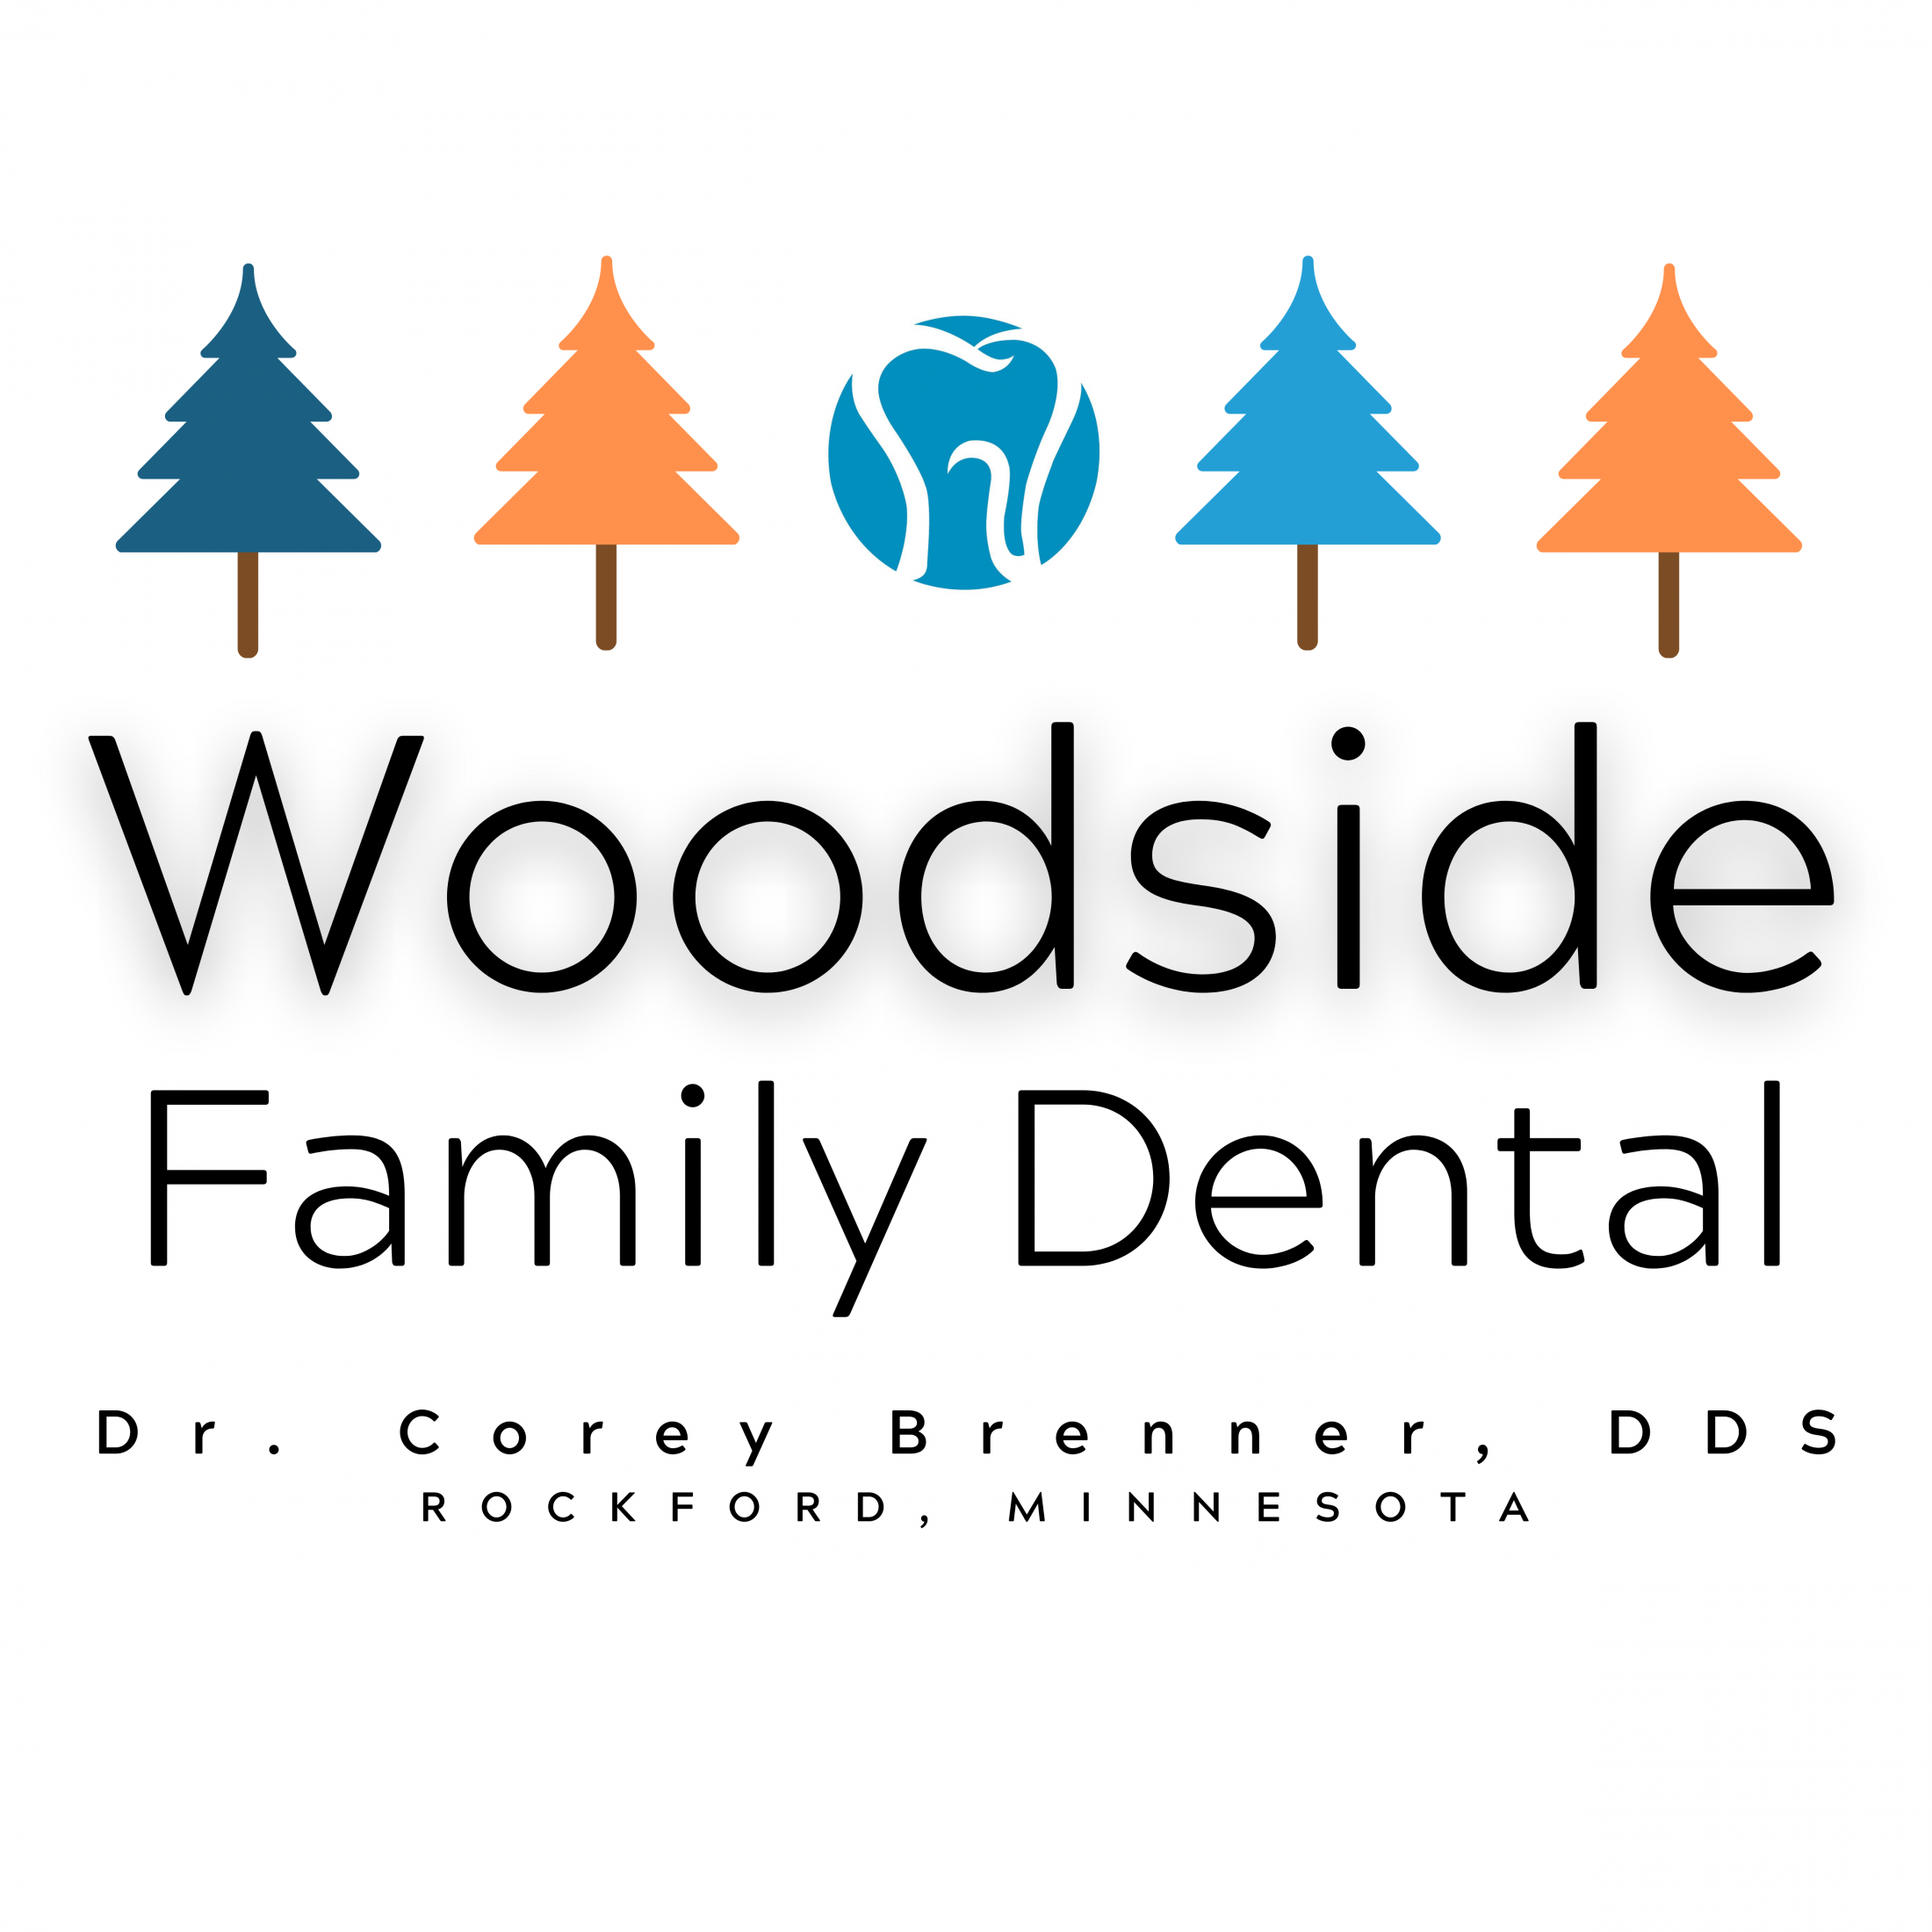 Link to Woodside Family Dental home page